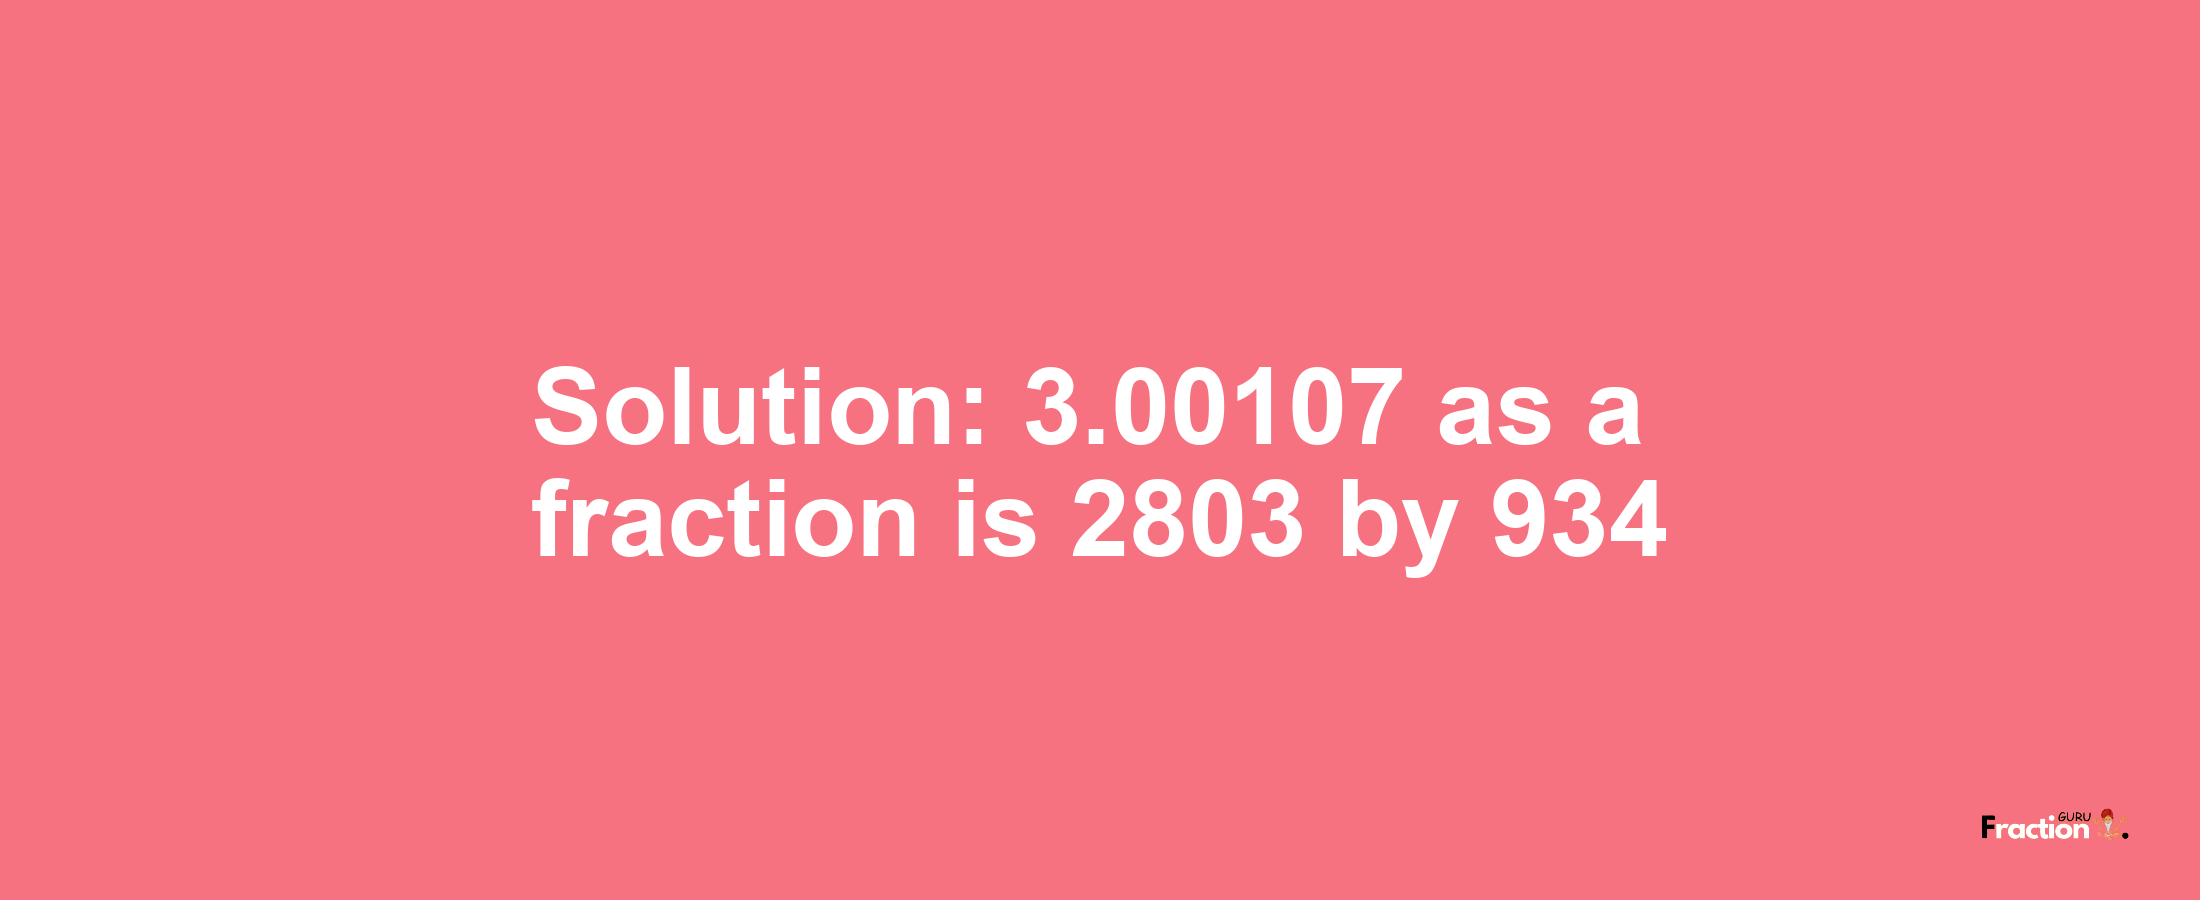 Solution:3.00107 as a fraction is 2803/934